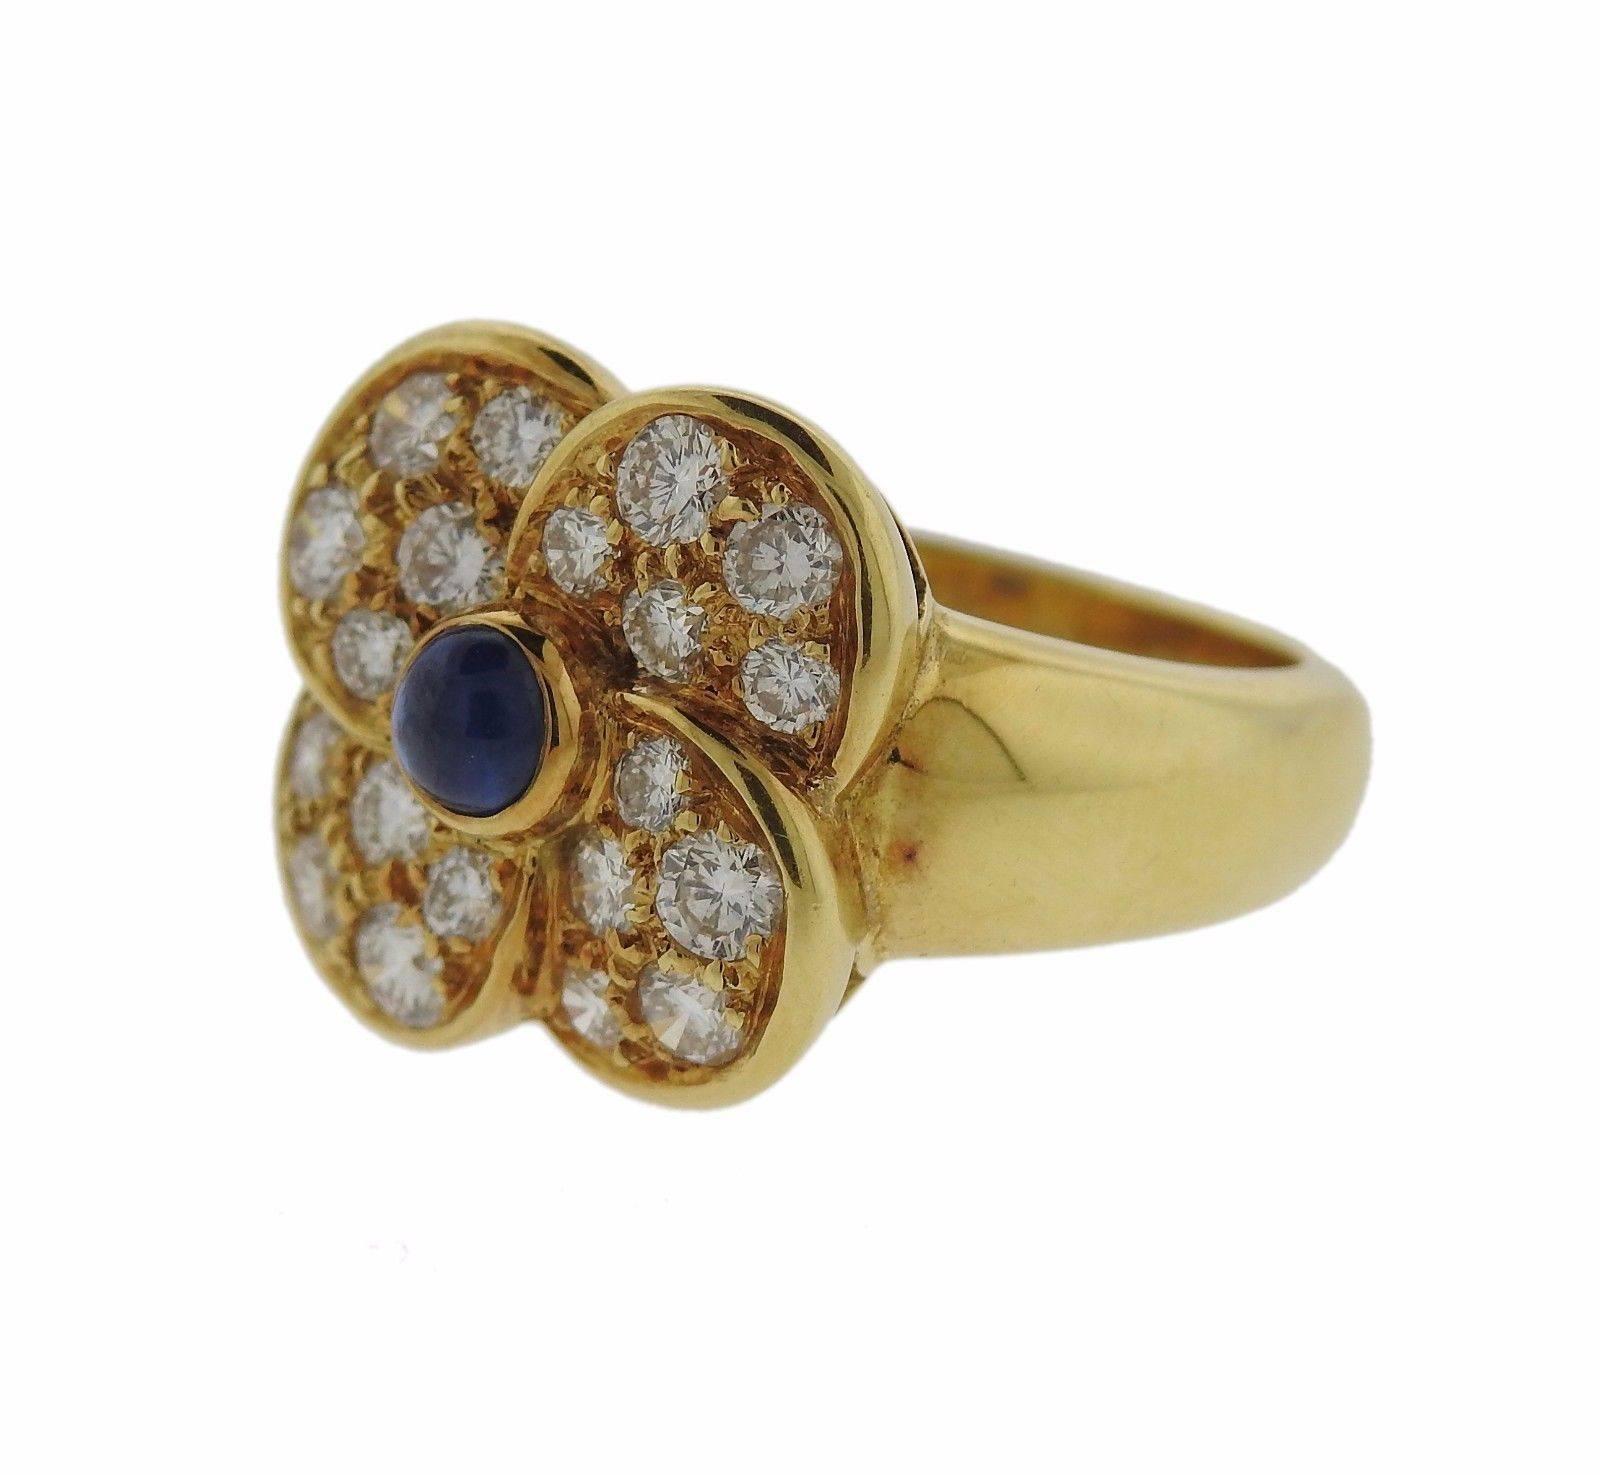 An 18k gold ring set with sapphires and approximately 1 carat of G/VS diamonds.  The ring is a size 6 1/2, the ring top is 15mm x 15mm.  The weight of the piece is 9 grams.  Marked: Dior, 3 OR 750.